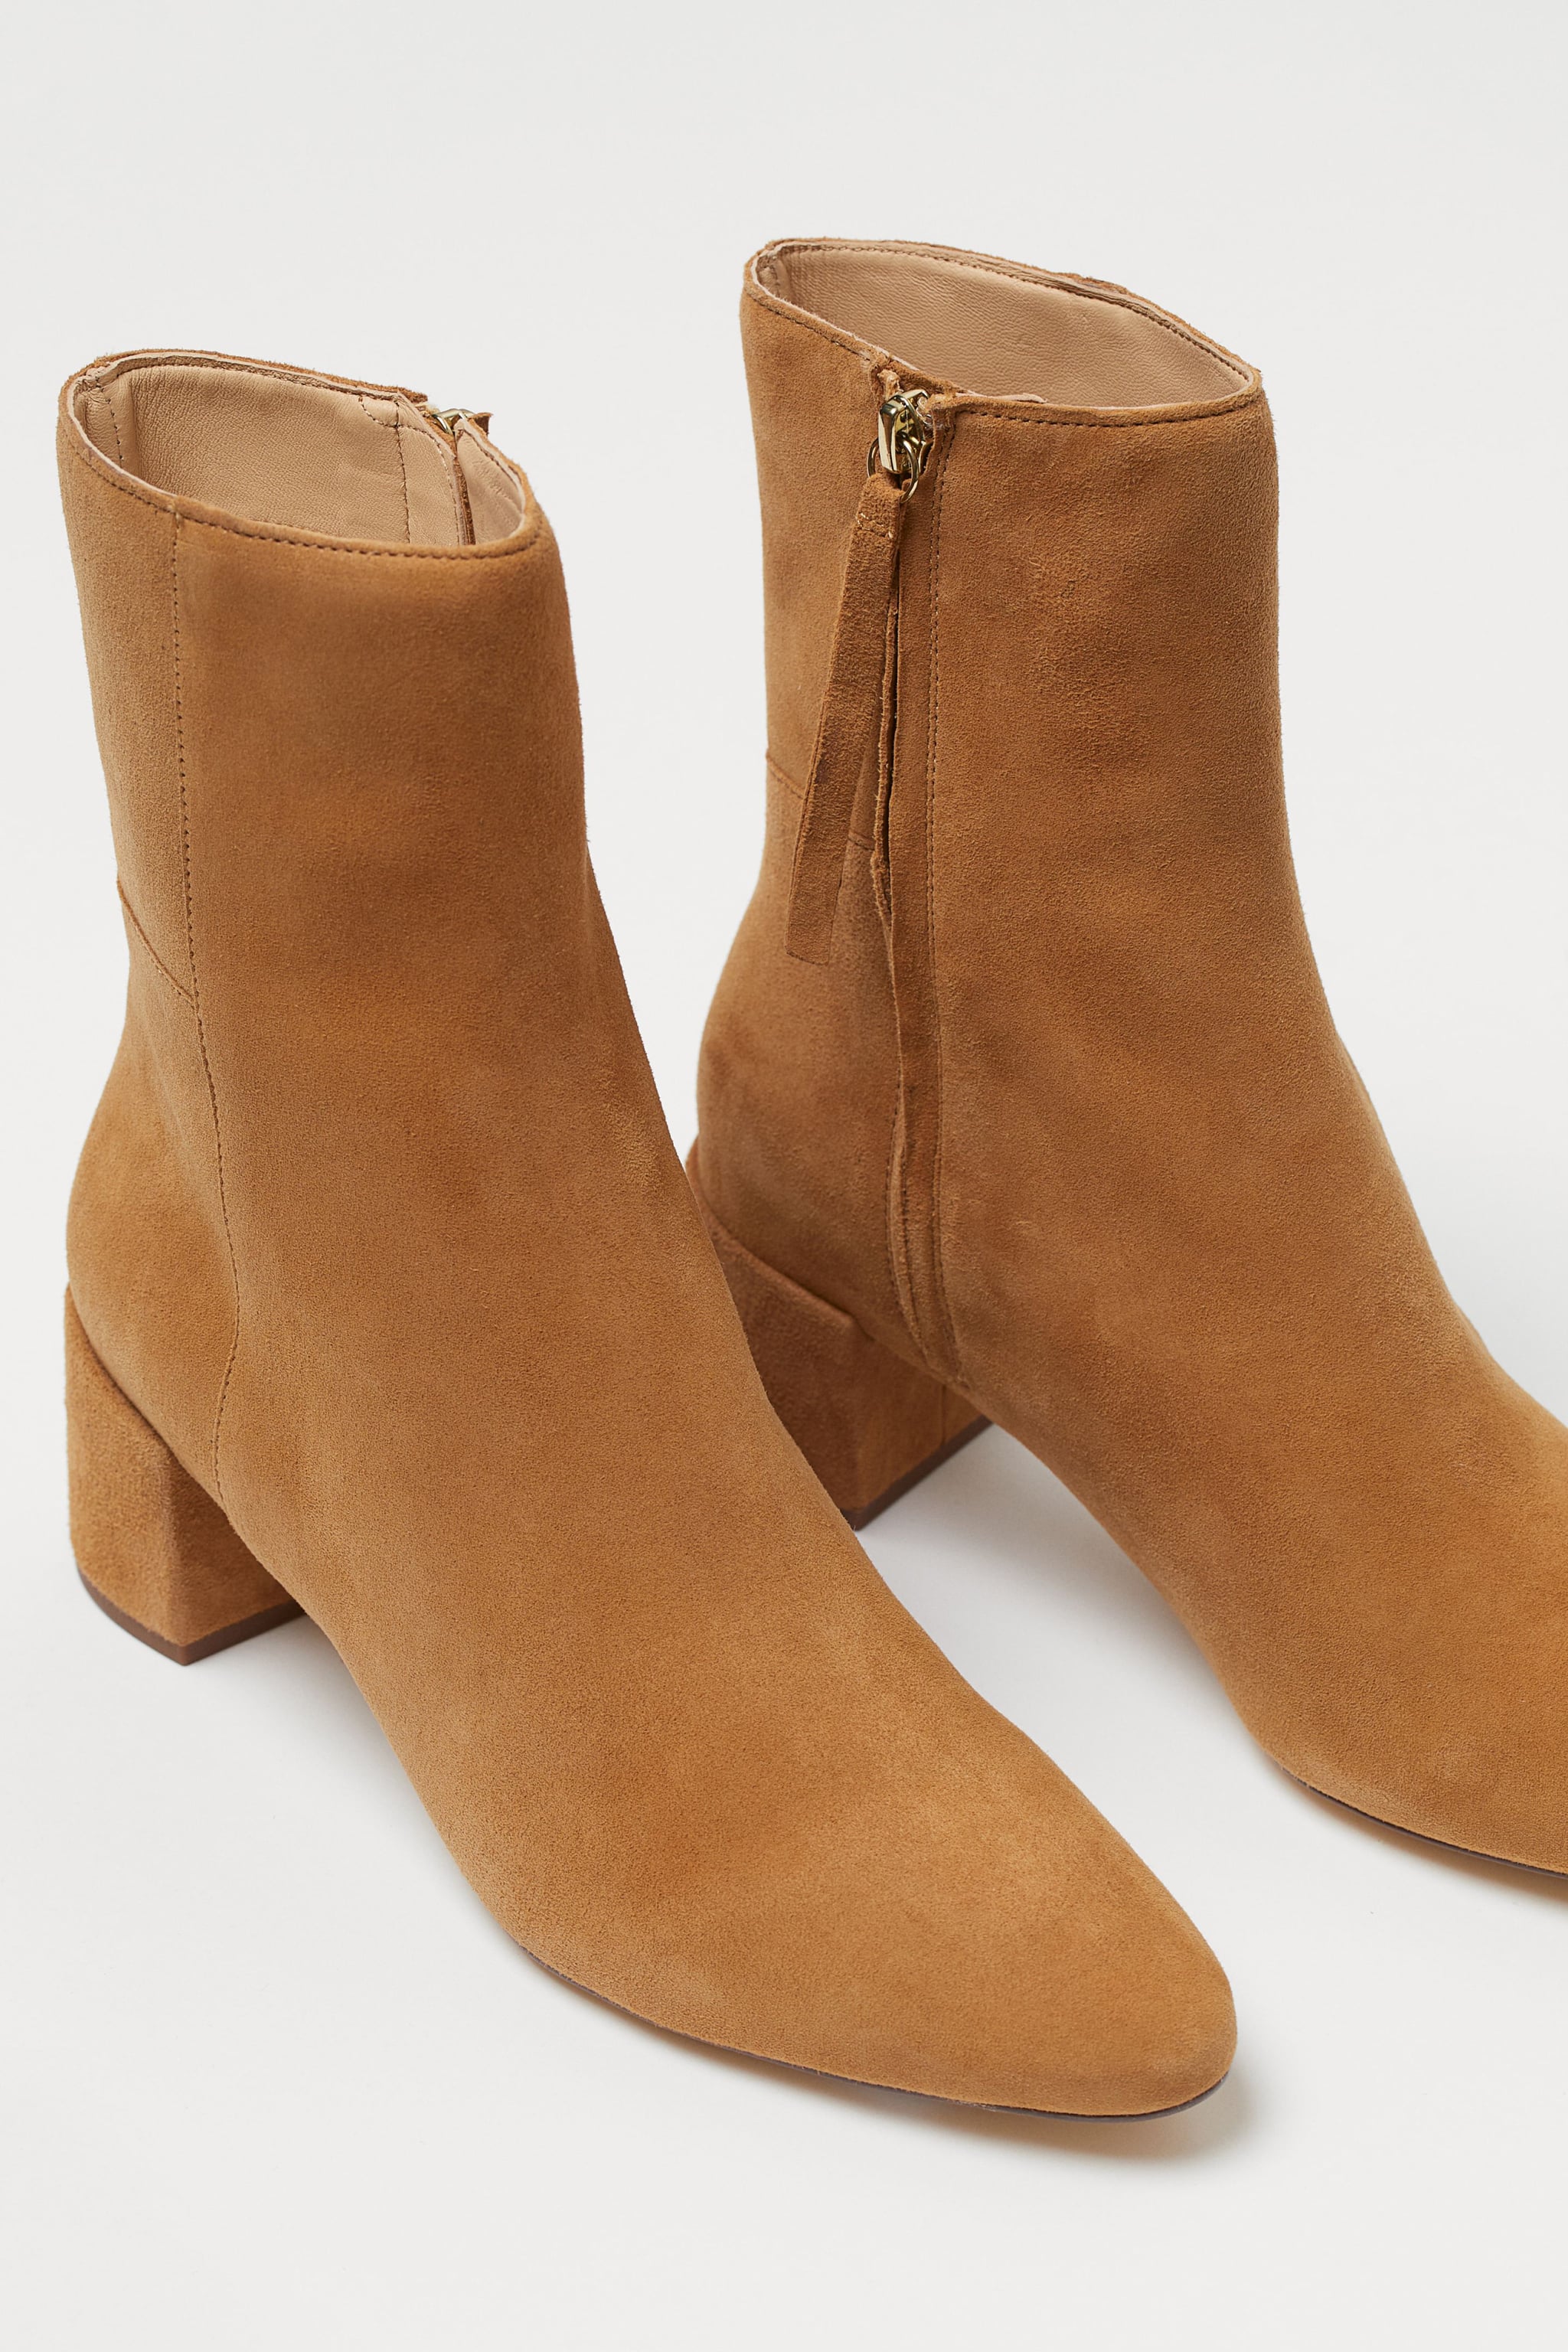 h&m wedge boots